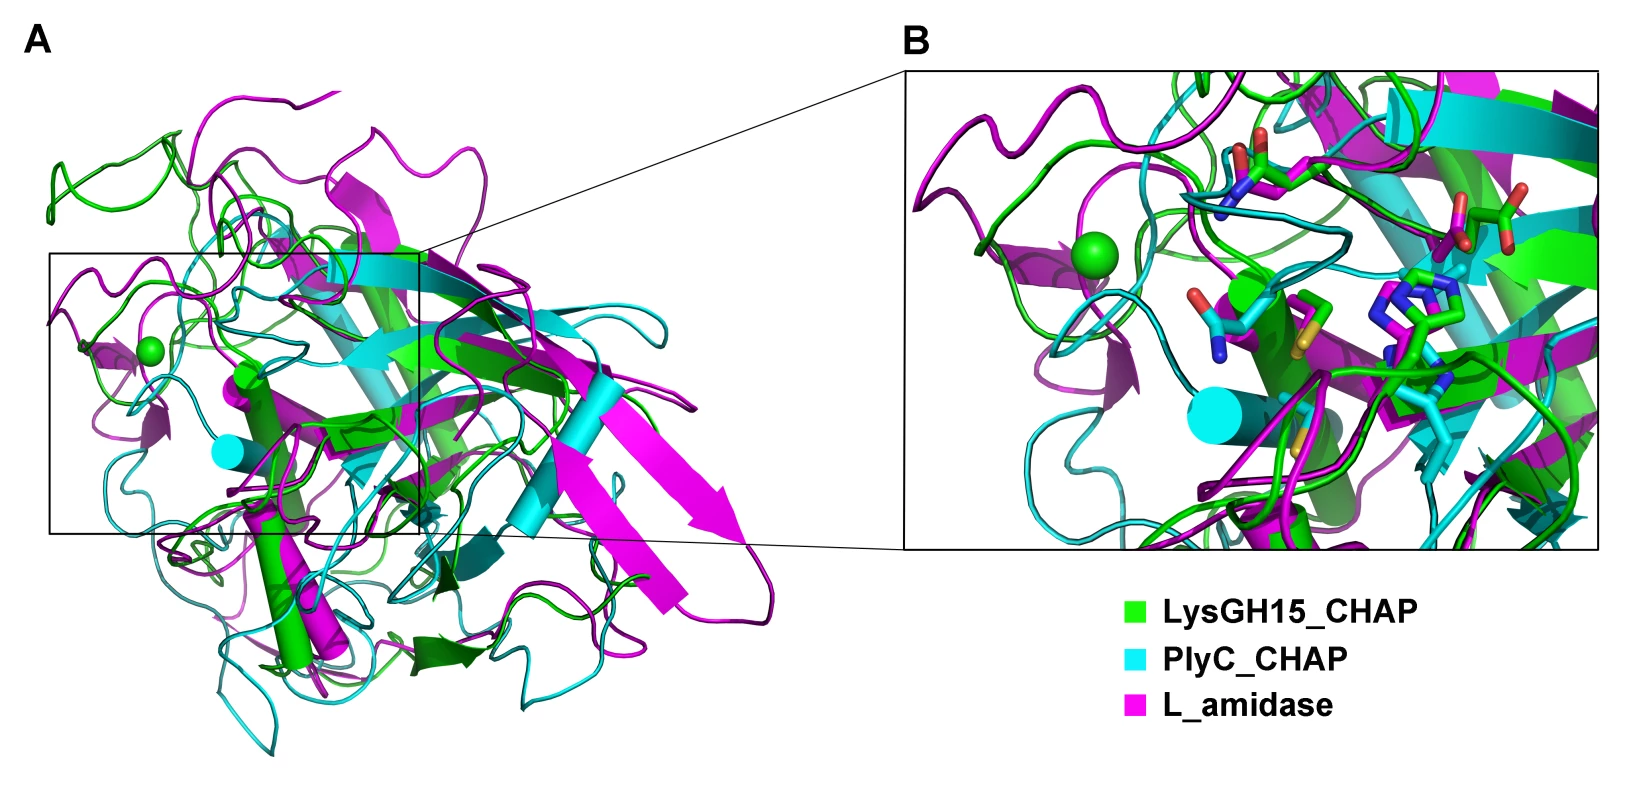 Structural comparison of the LysGH15 CHAP domain with homologous proteins.